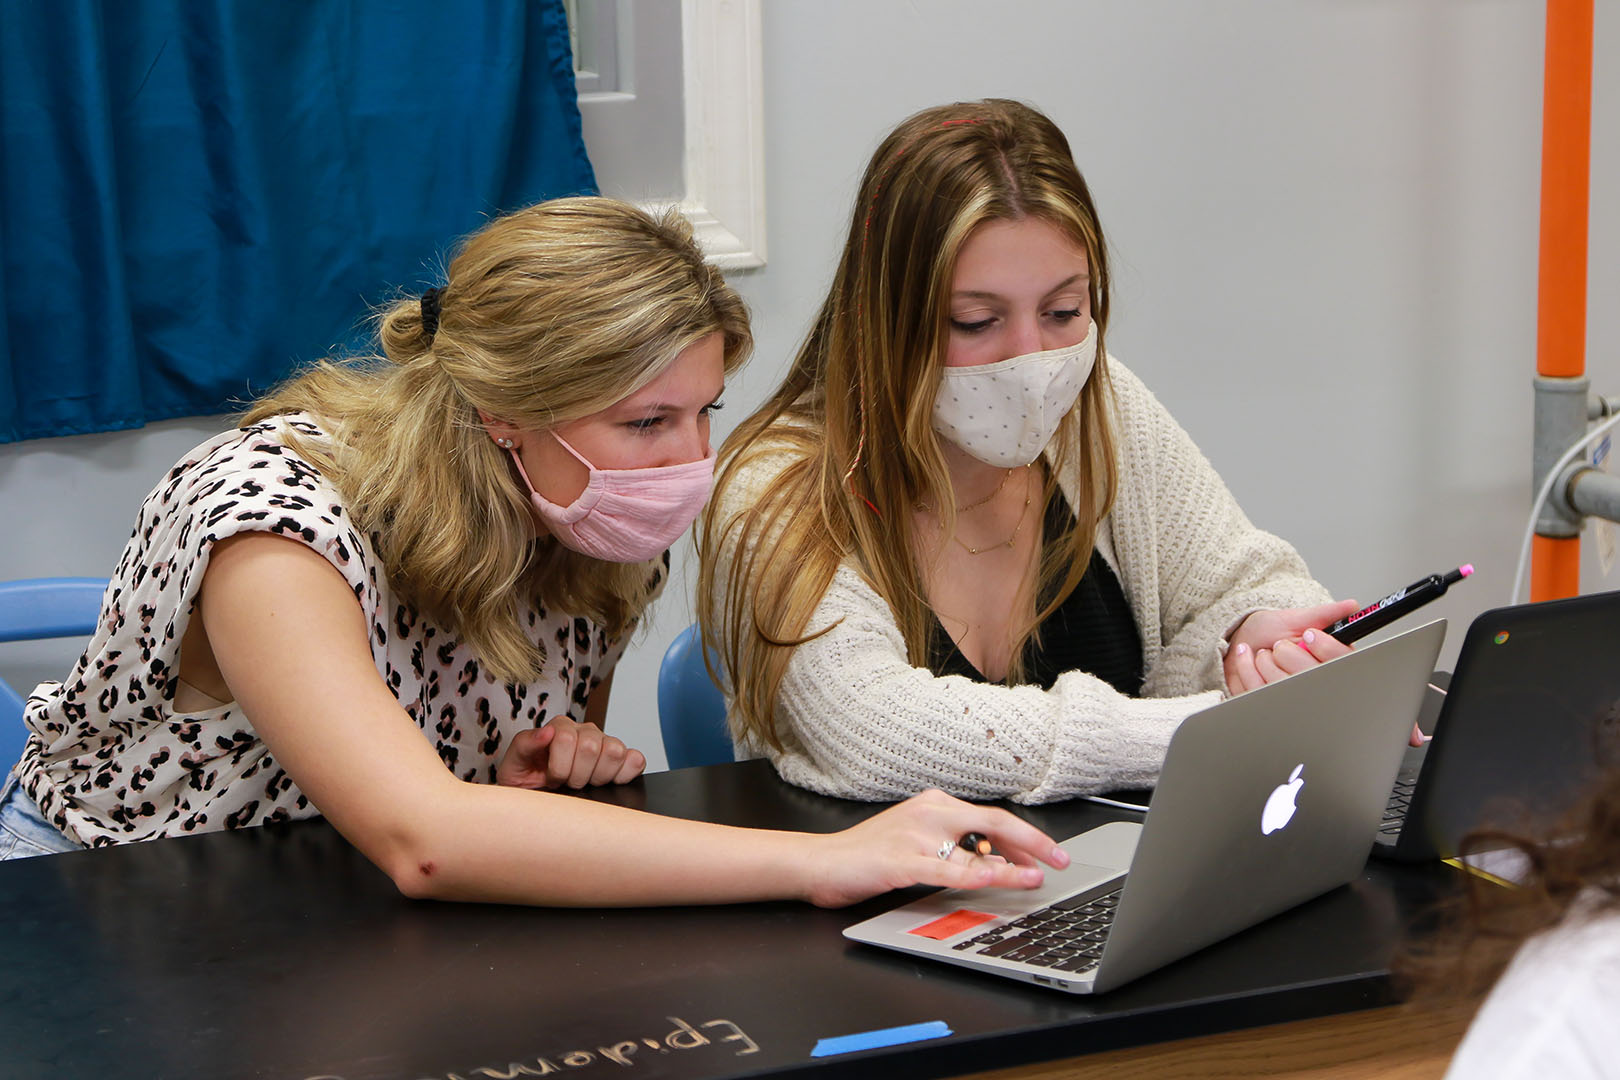 Picture of teacher and a student working on a computer together, both are wearing face masks.